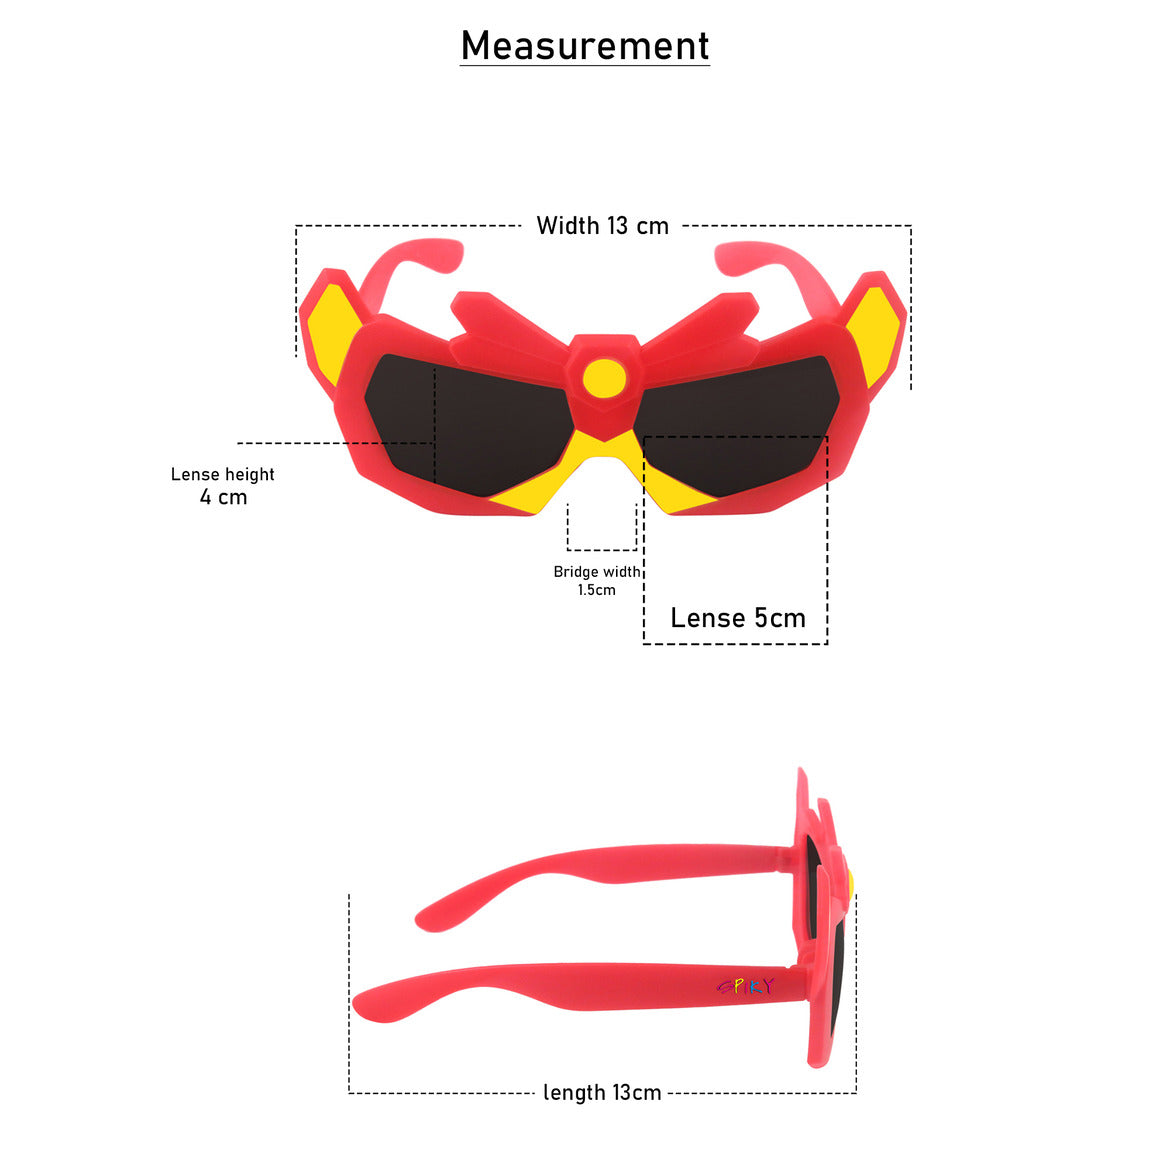 Spiky Robot UV Protected Sunglass - Red